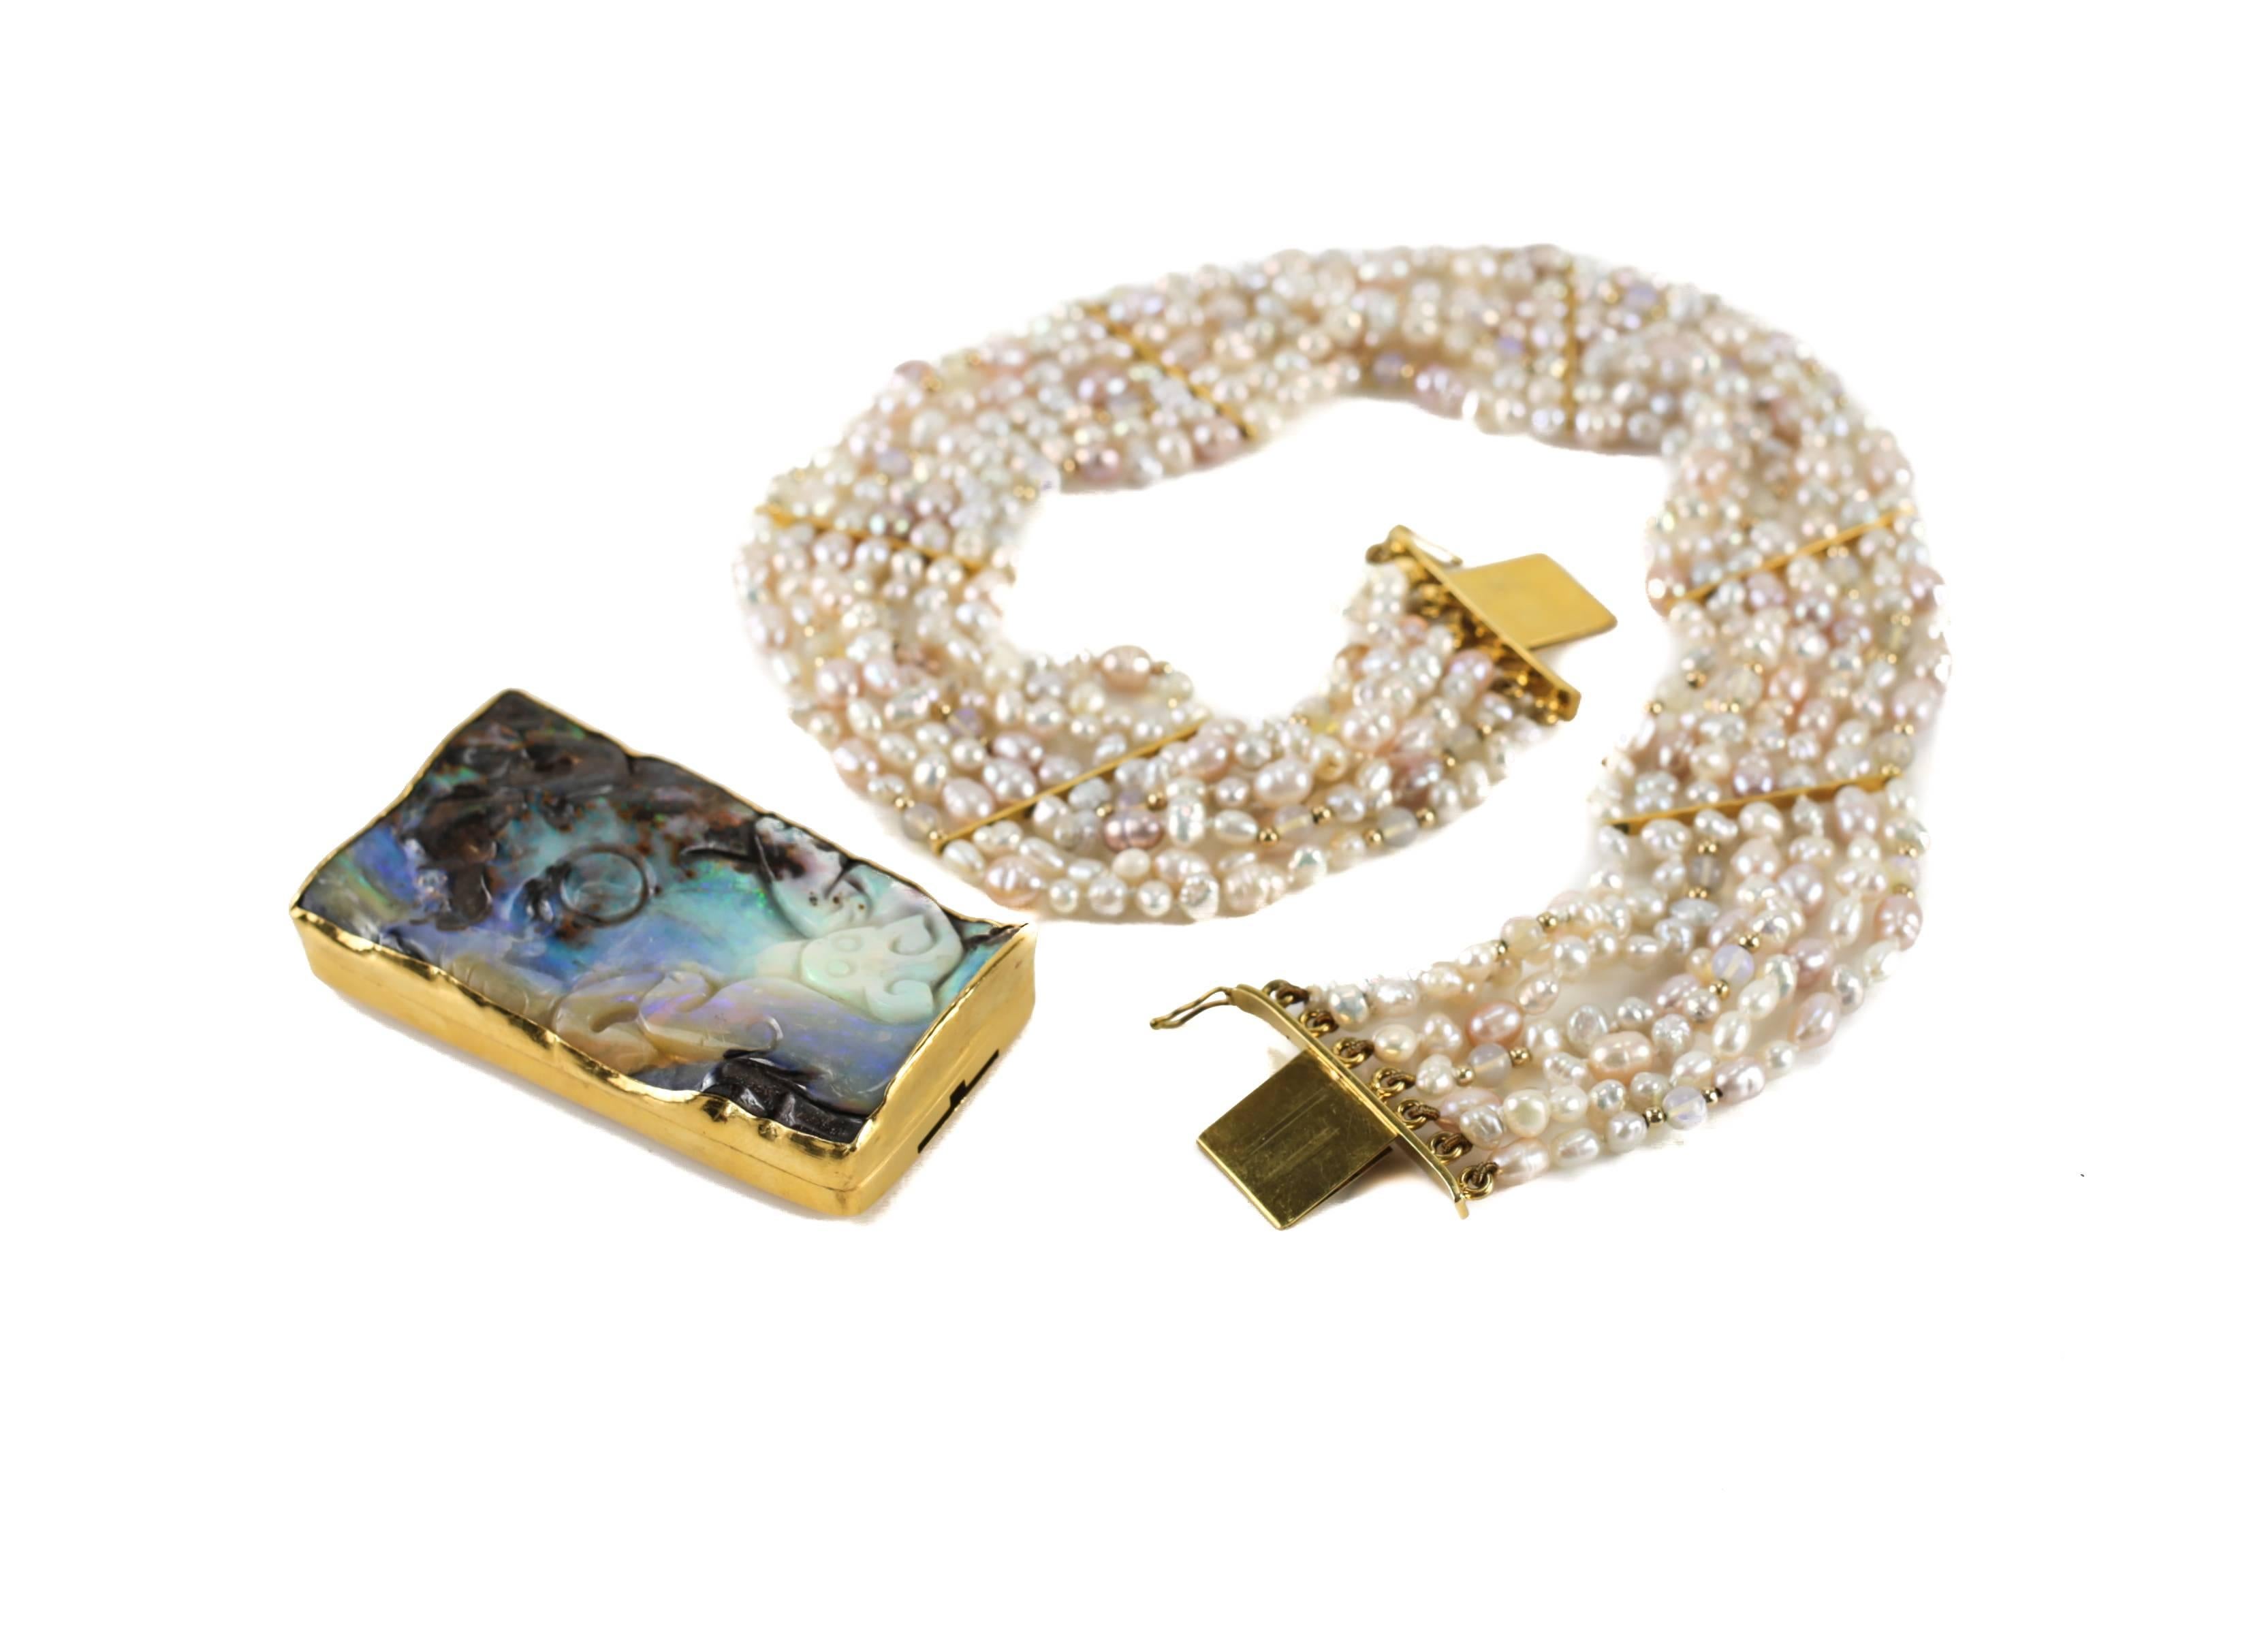 A substantial opal necklace by the late San Francisco based jeweler Harry Fireside. Featuring an extraordinary carved solid opal singlet with 24k yellow gold mounts and an 18-karat yellow gold back. The natural centre mounted opal with several